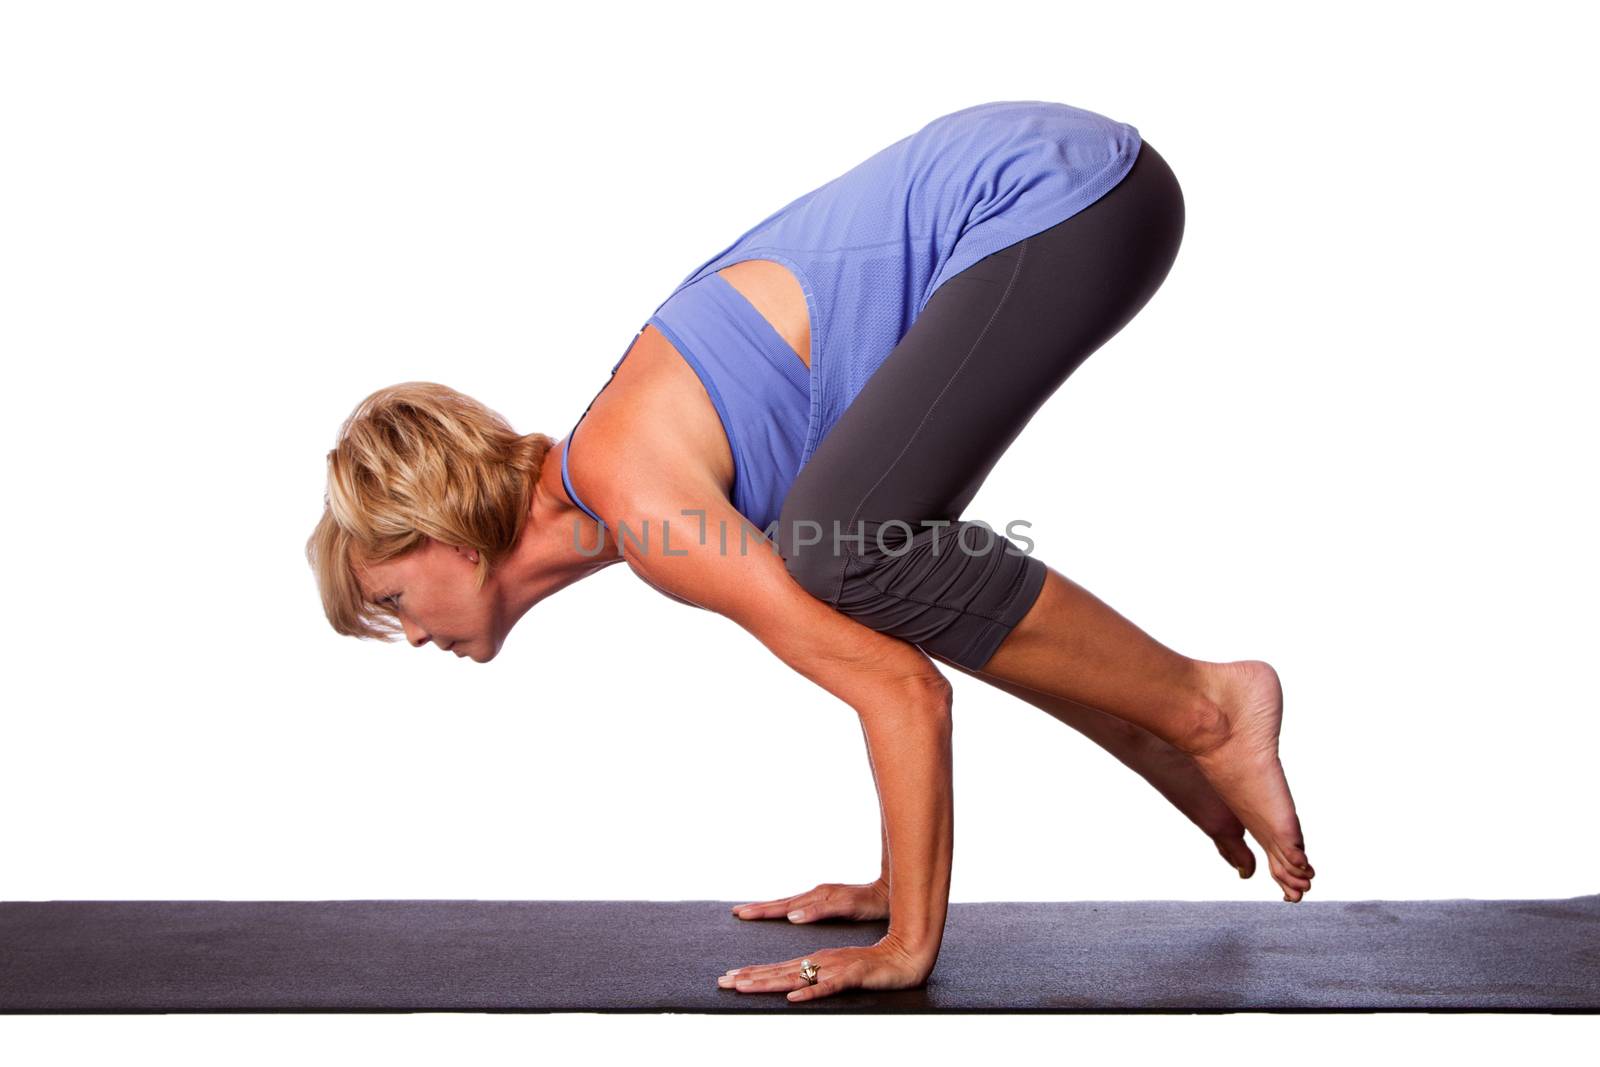 Beautiful woman standing on hands with feet lifted up doing Crane Bakasana yoga pose, on white.